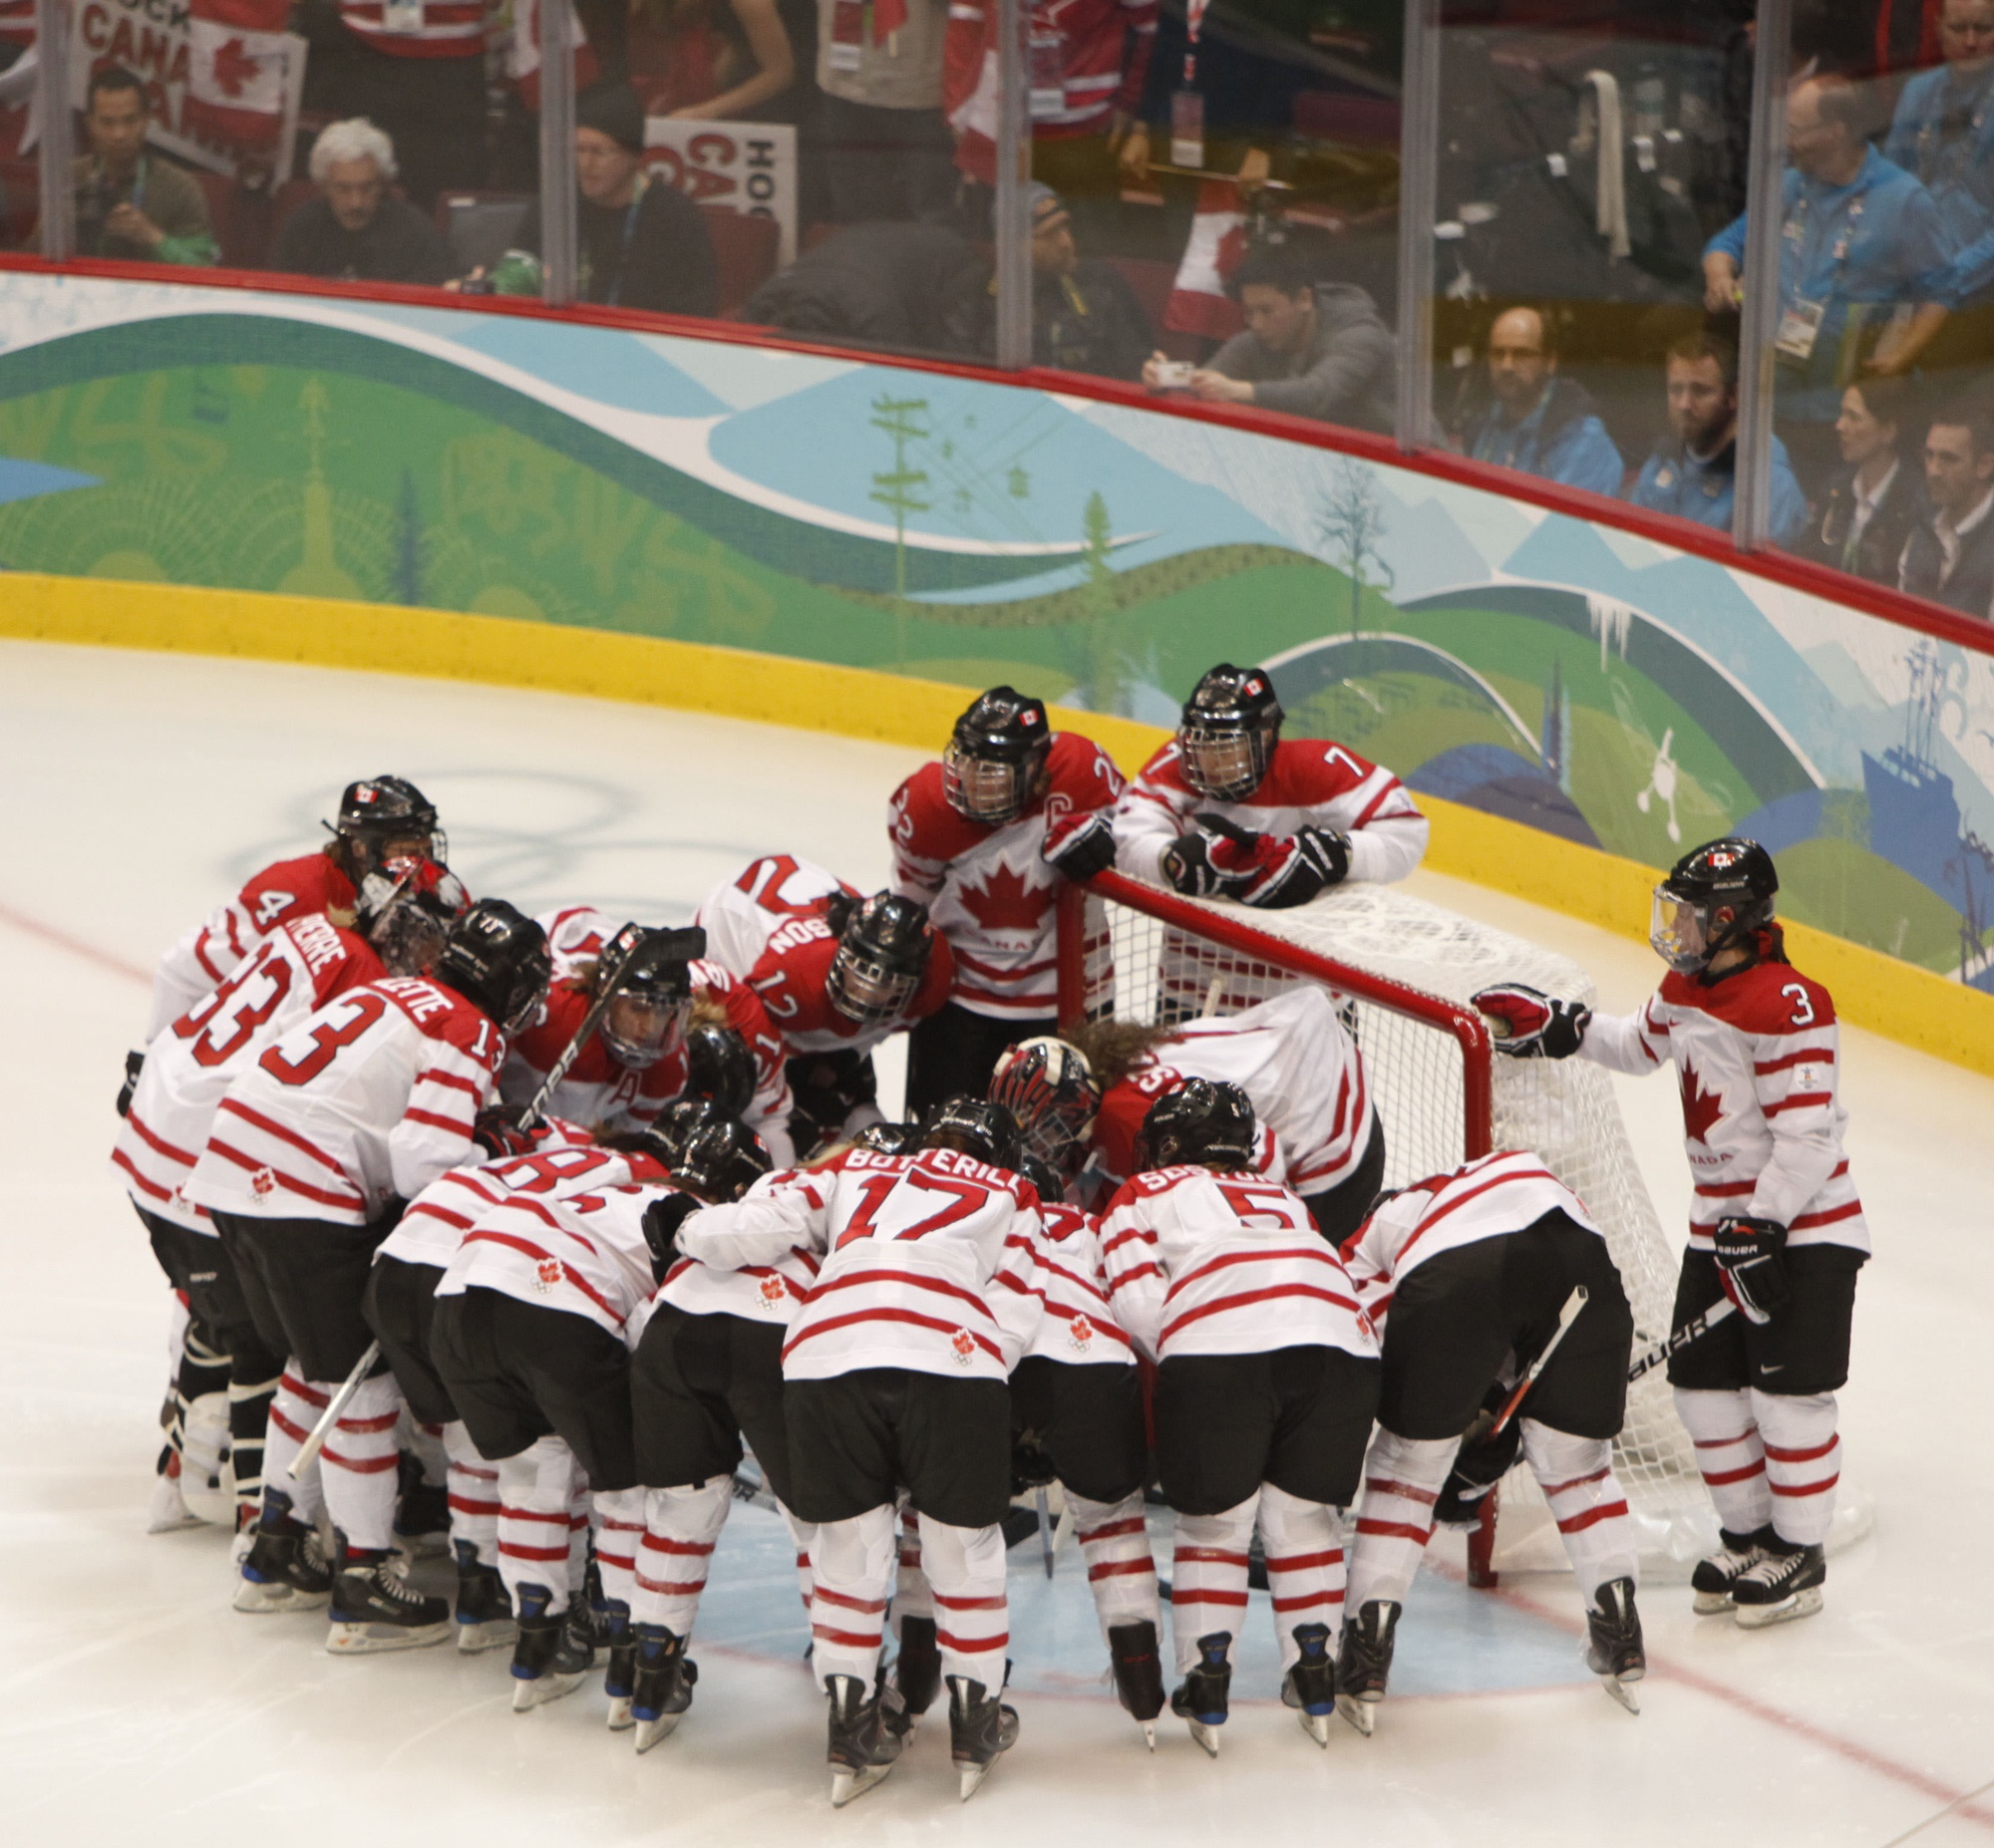 YVR0 20100225 VANCOUVER, BC, CANADA : Canada players huddle before their game against the USA in the gold medal women's hockey game at the Vancouver 2010 Olympic Winter games in Vancouver, Canada at the Canada Hockey Place on Thursday, 25 February, 2010. Canada won the game 2-0.